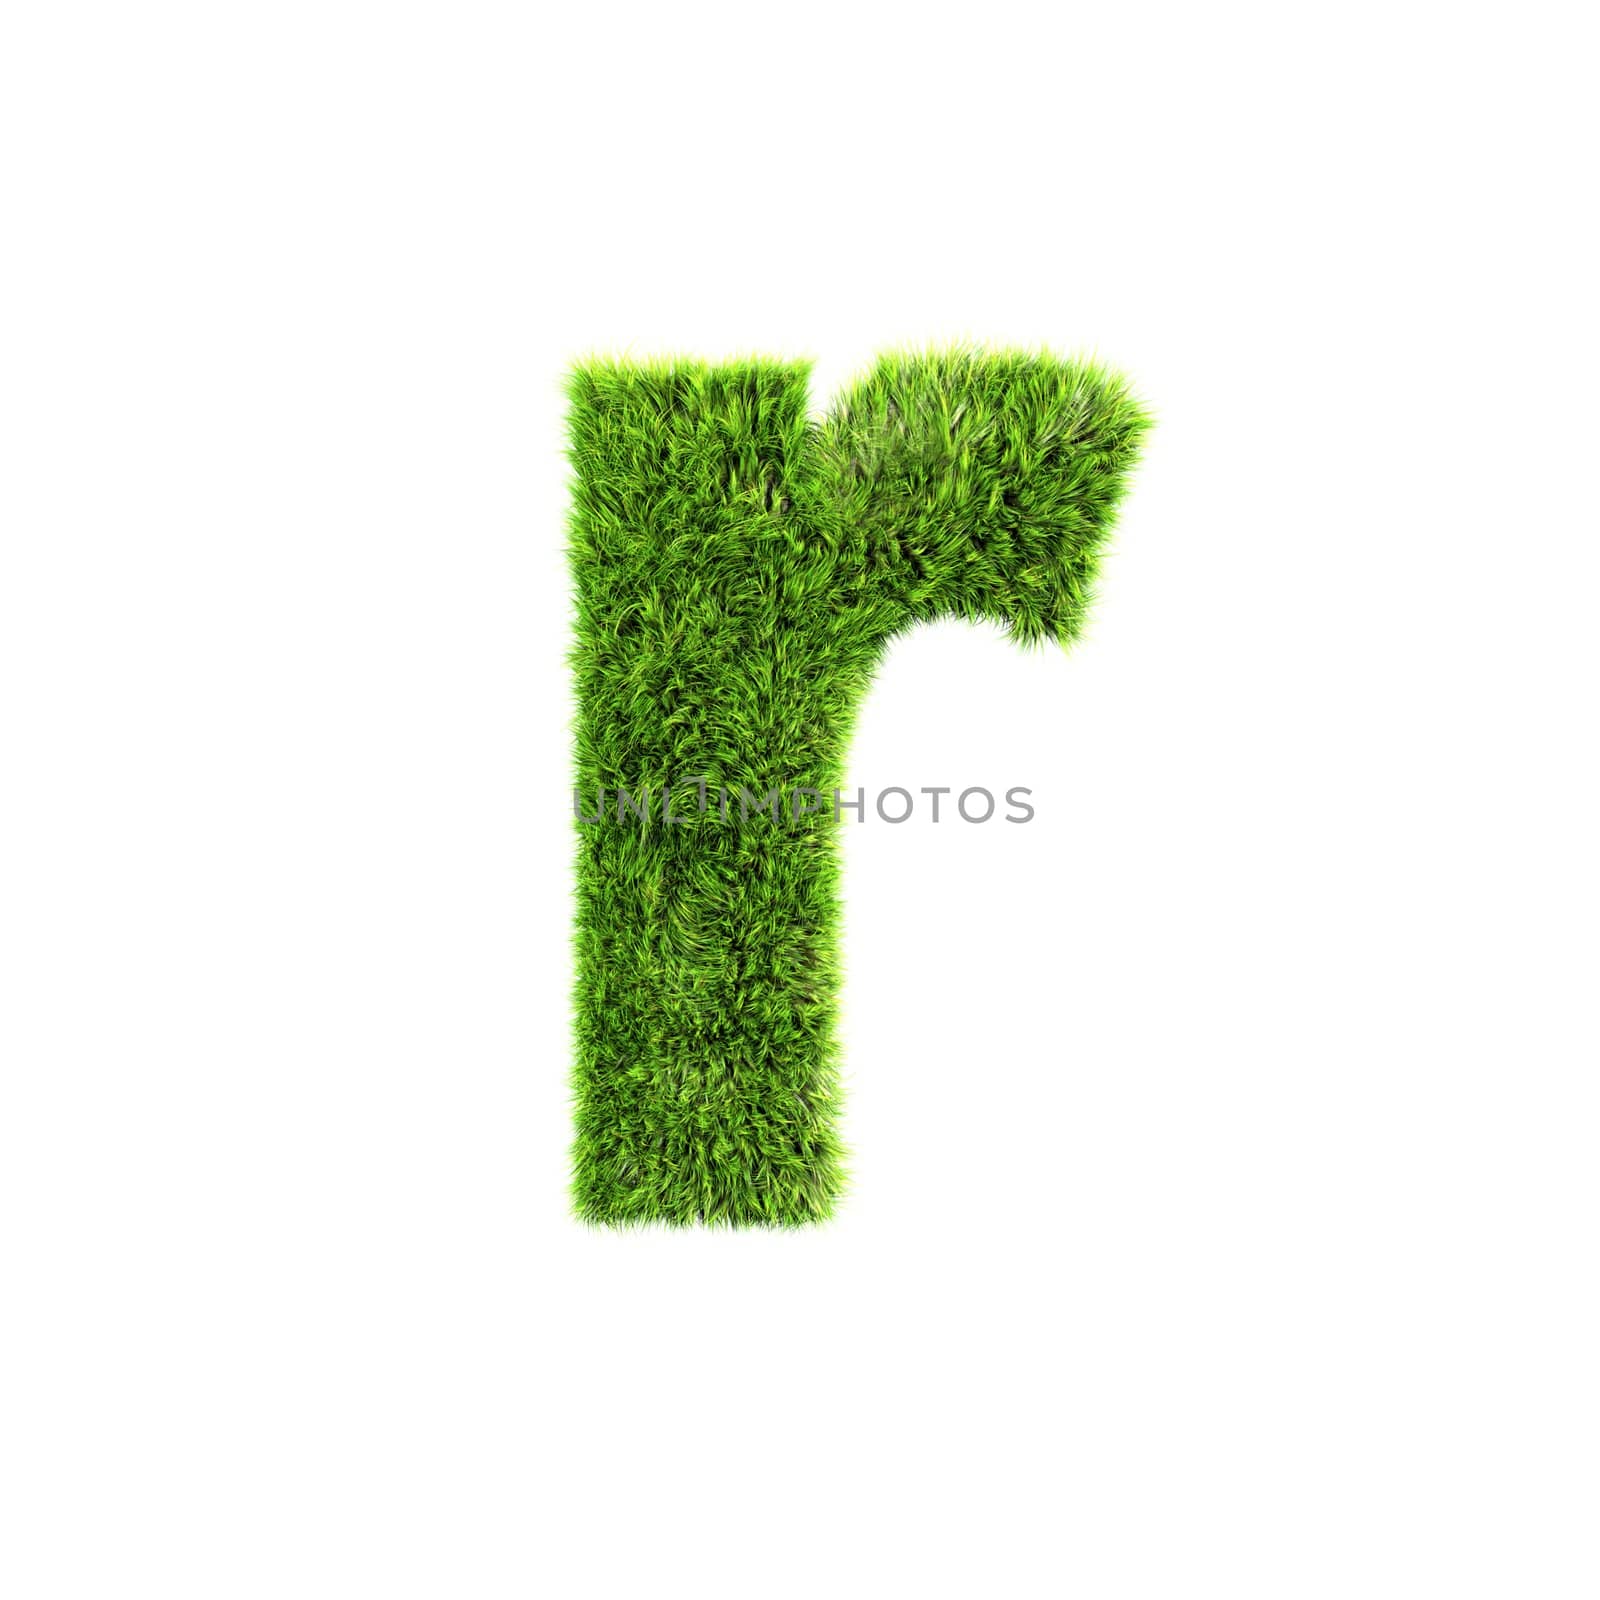 3d grass letter isolated on white background - r by chrisroll